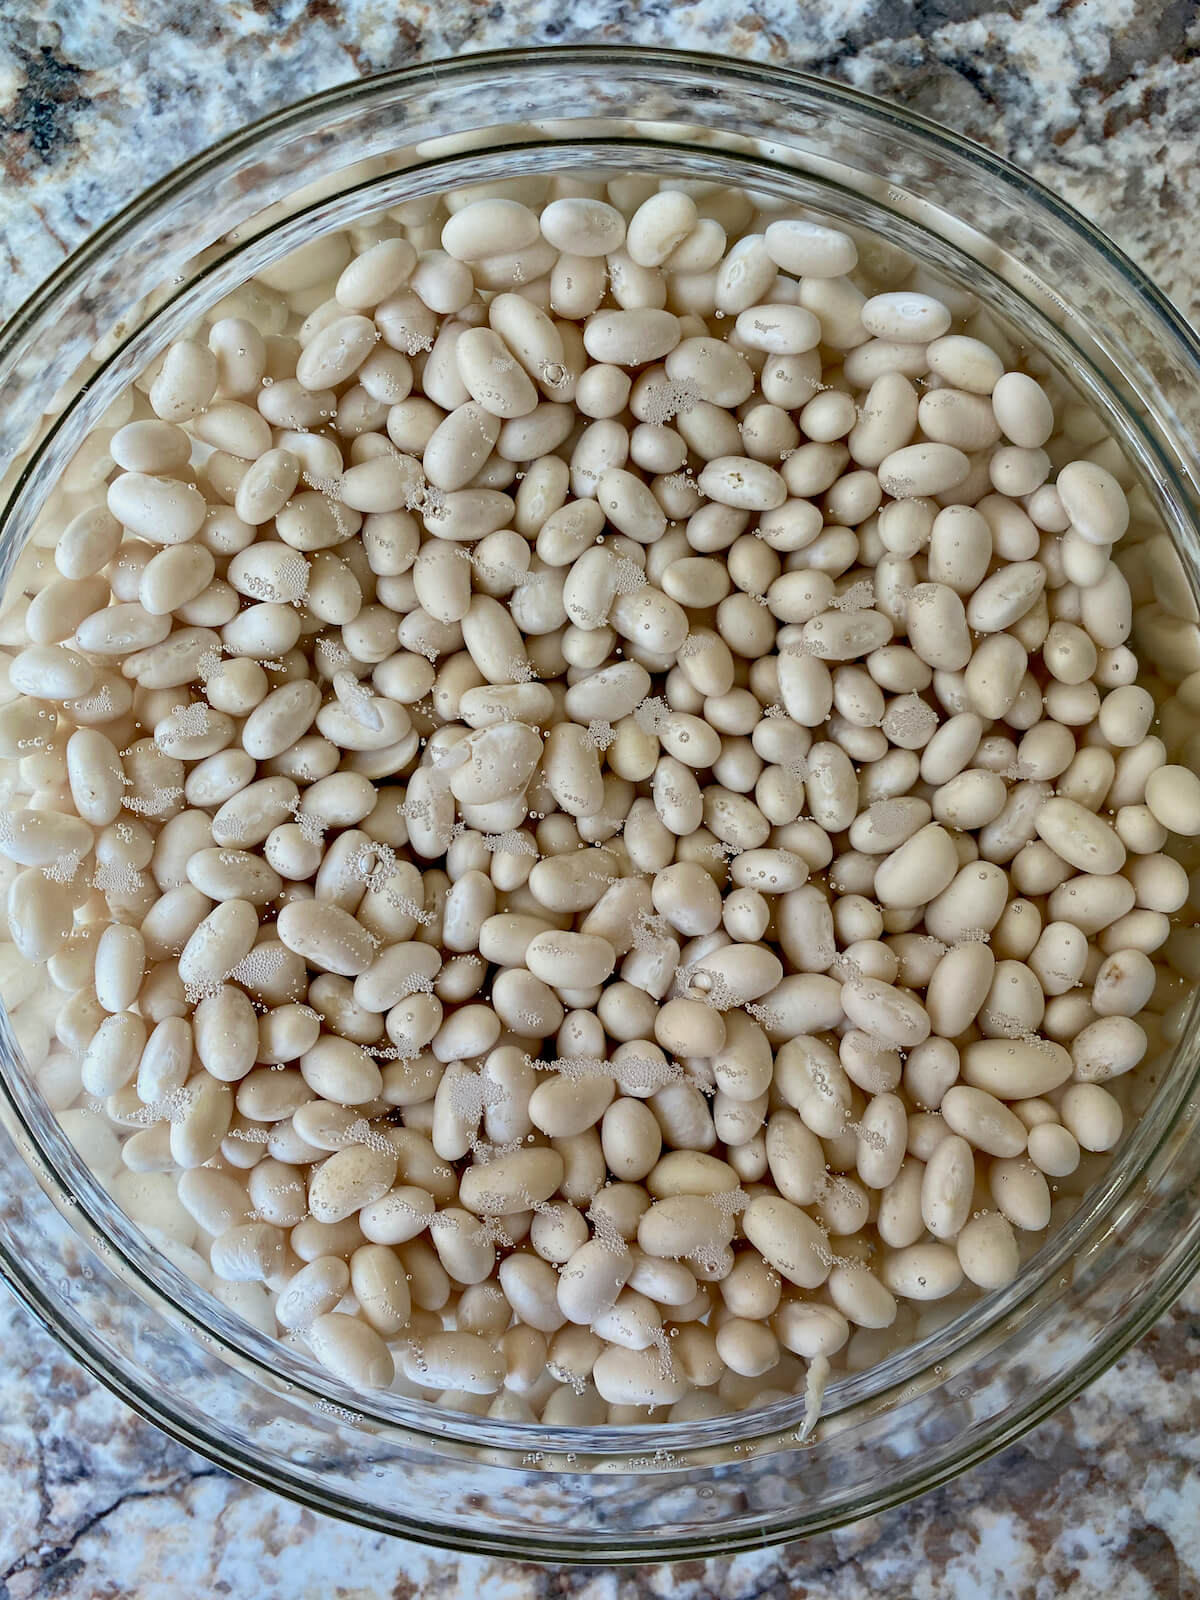 Dried navy beans in a bowl of water after soaking overnight.